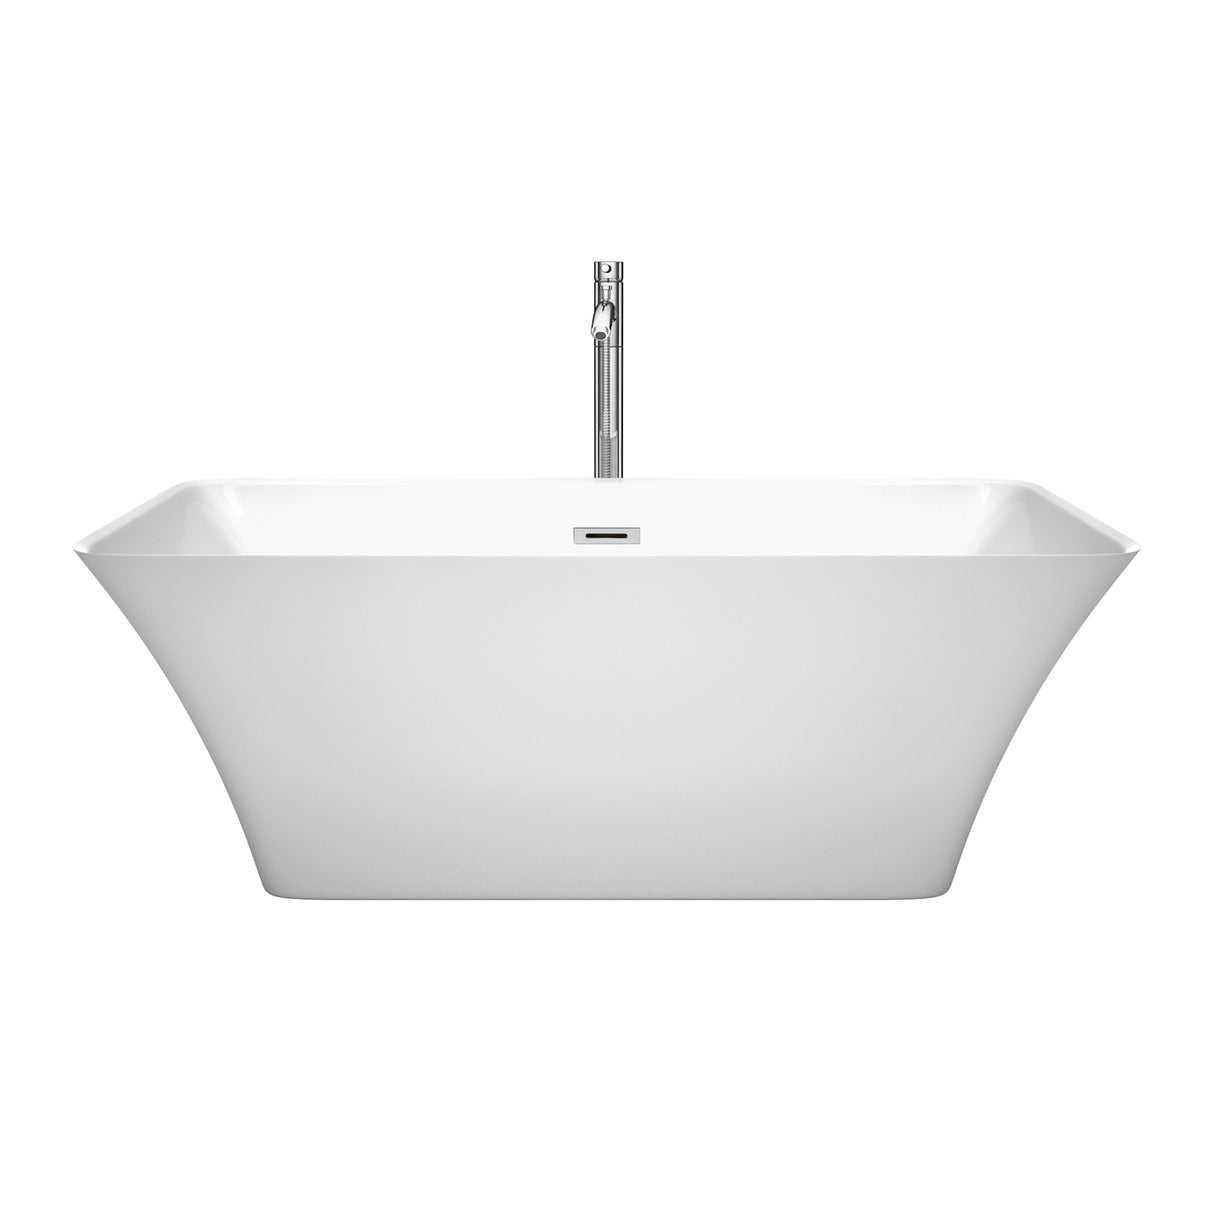 Tiffany 59 Inch Freestanding Bathtub in White with Floor Mounted Faucet Drain and Overflow Trim in Polished Chrome